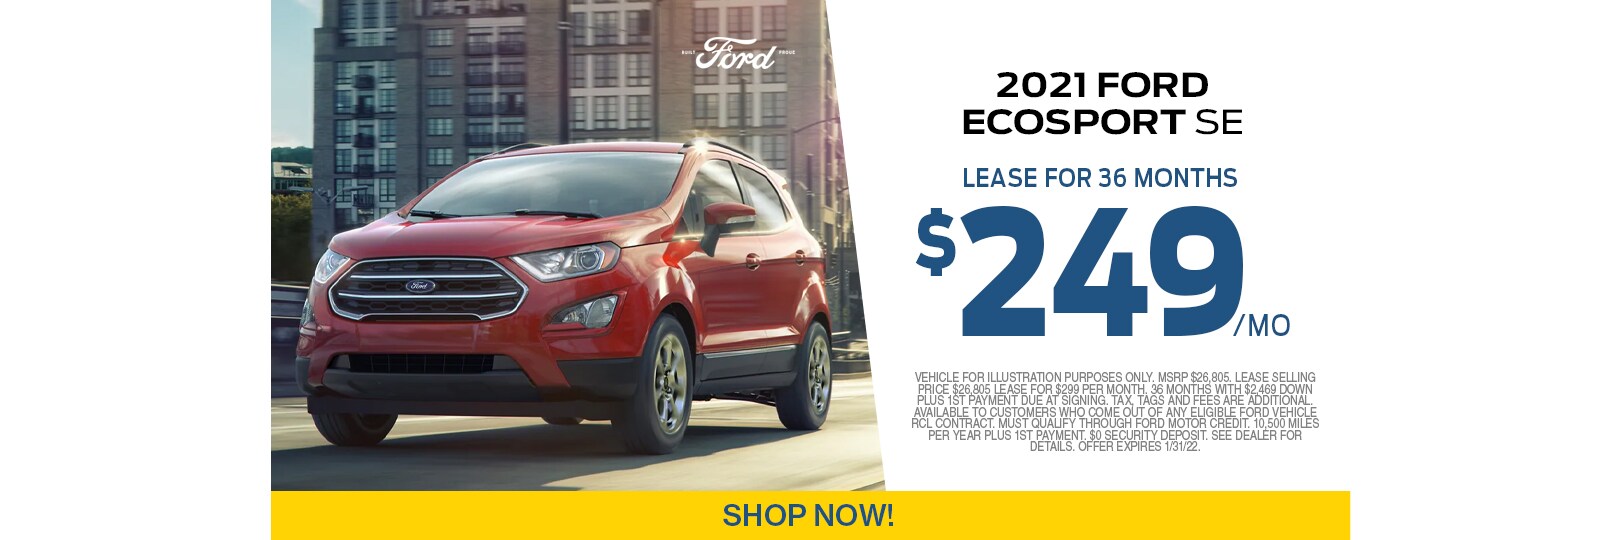 New 2021 Ford Ecosport